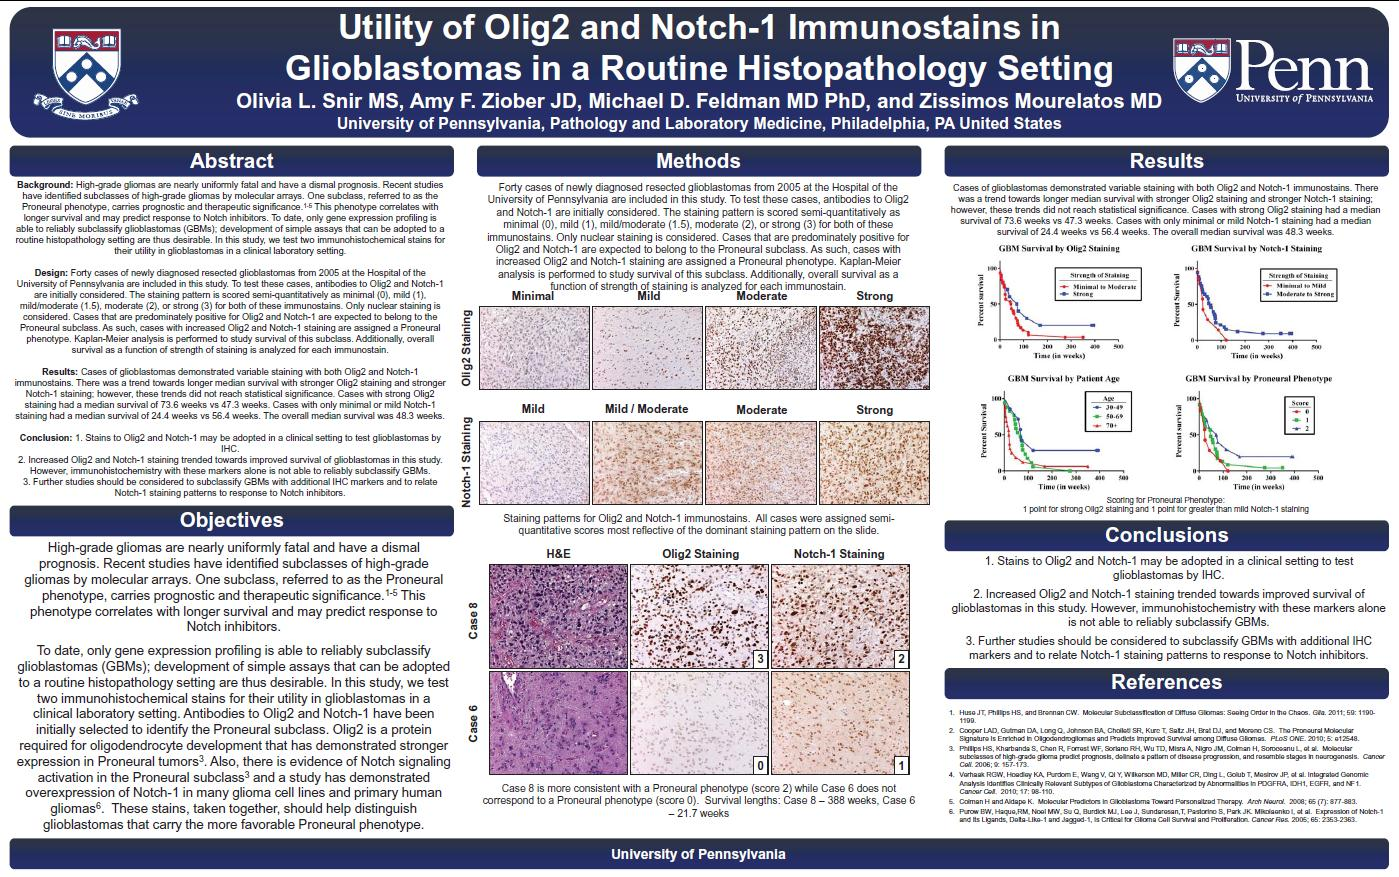 Utility of Olig-2 and Notch-1 immunostains in